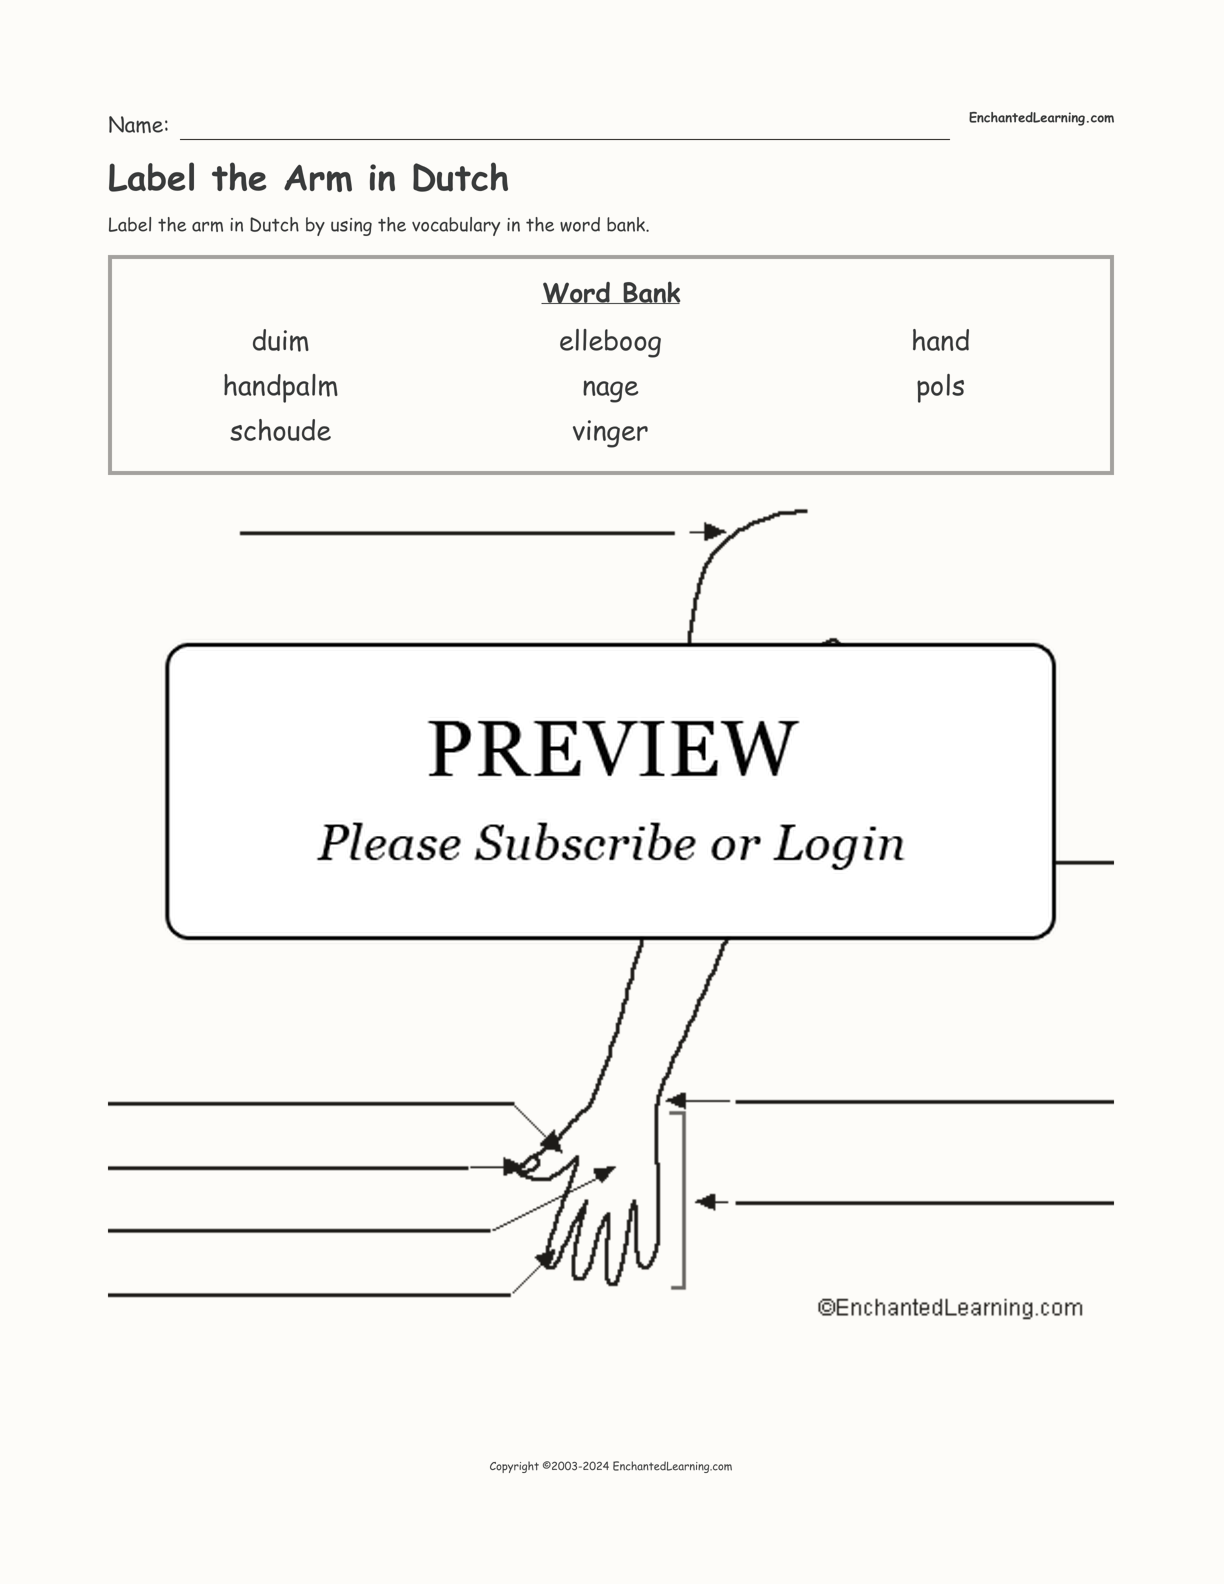 Label the Arm in Dutch interactive worksheet page 1